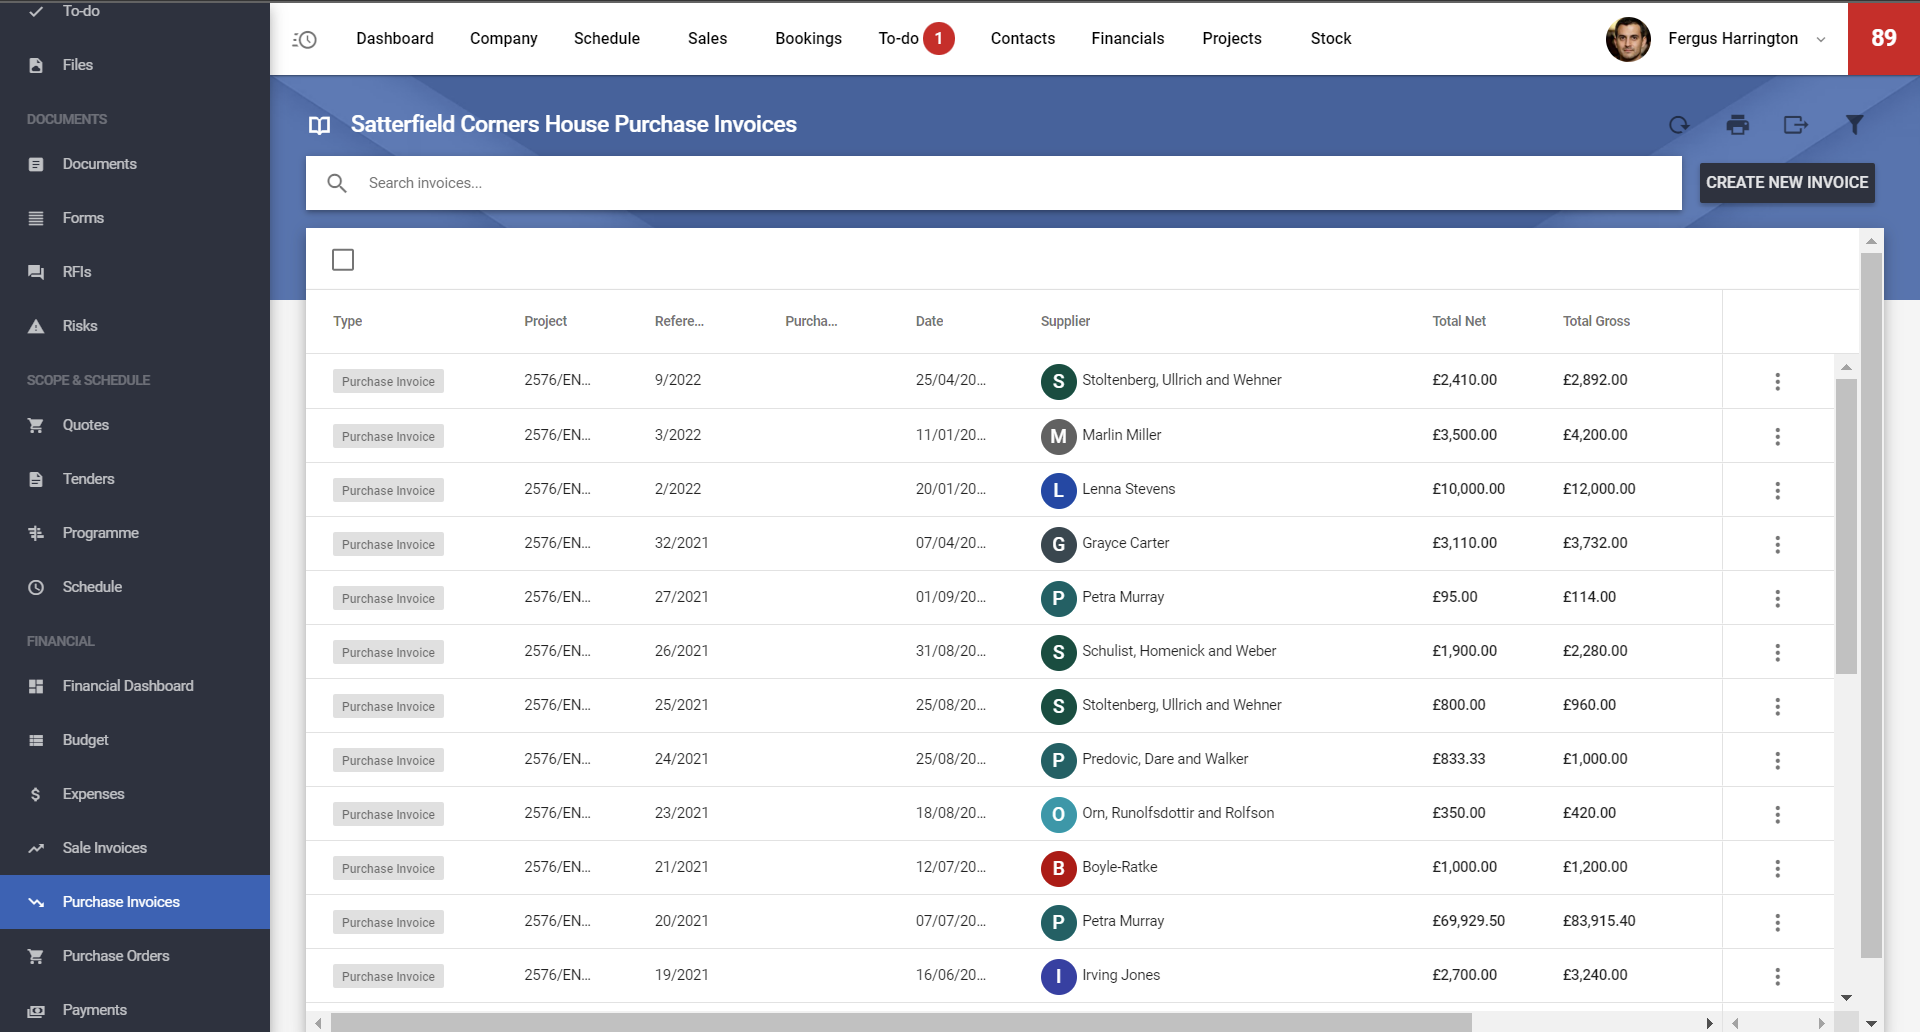 List of purchase orders visible on Archdesk software dashboard